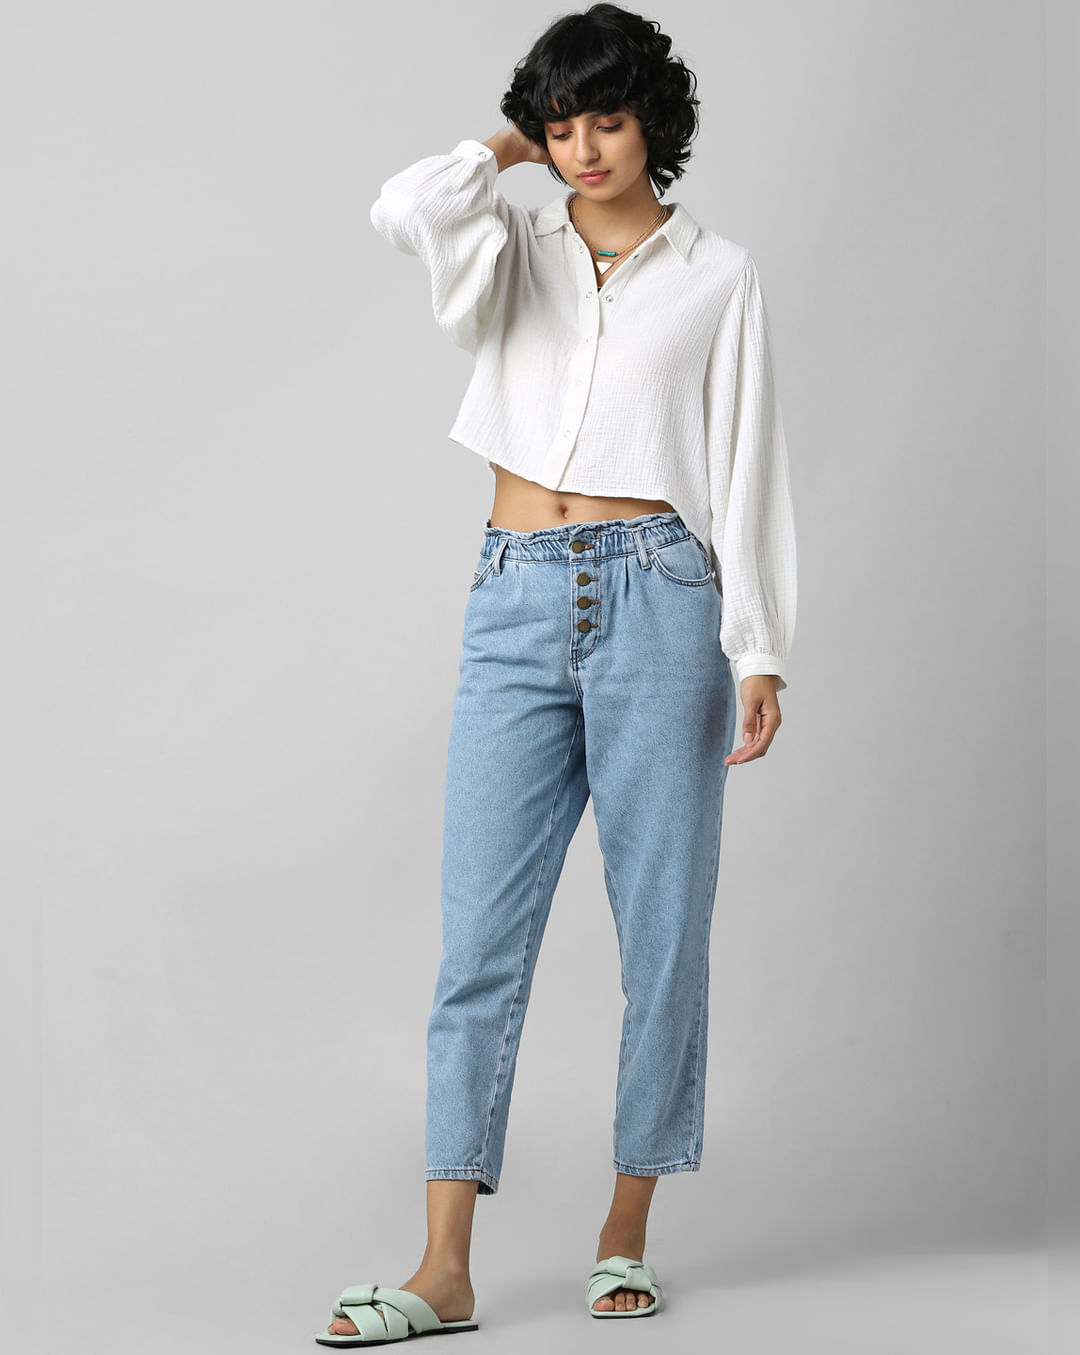 Light Blue Tapered Pants with Light Blue Pants Outfits For Women (7 ideas &  outfits)